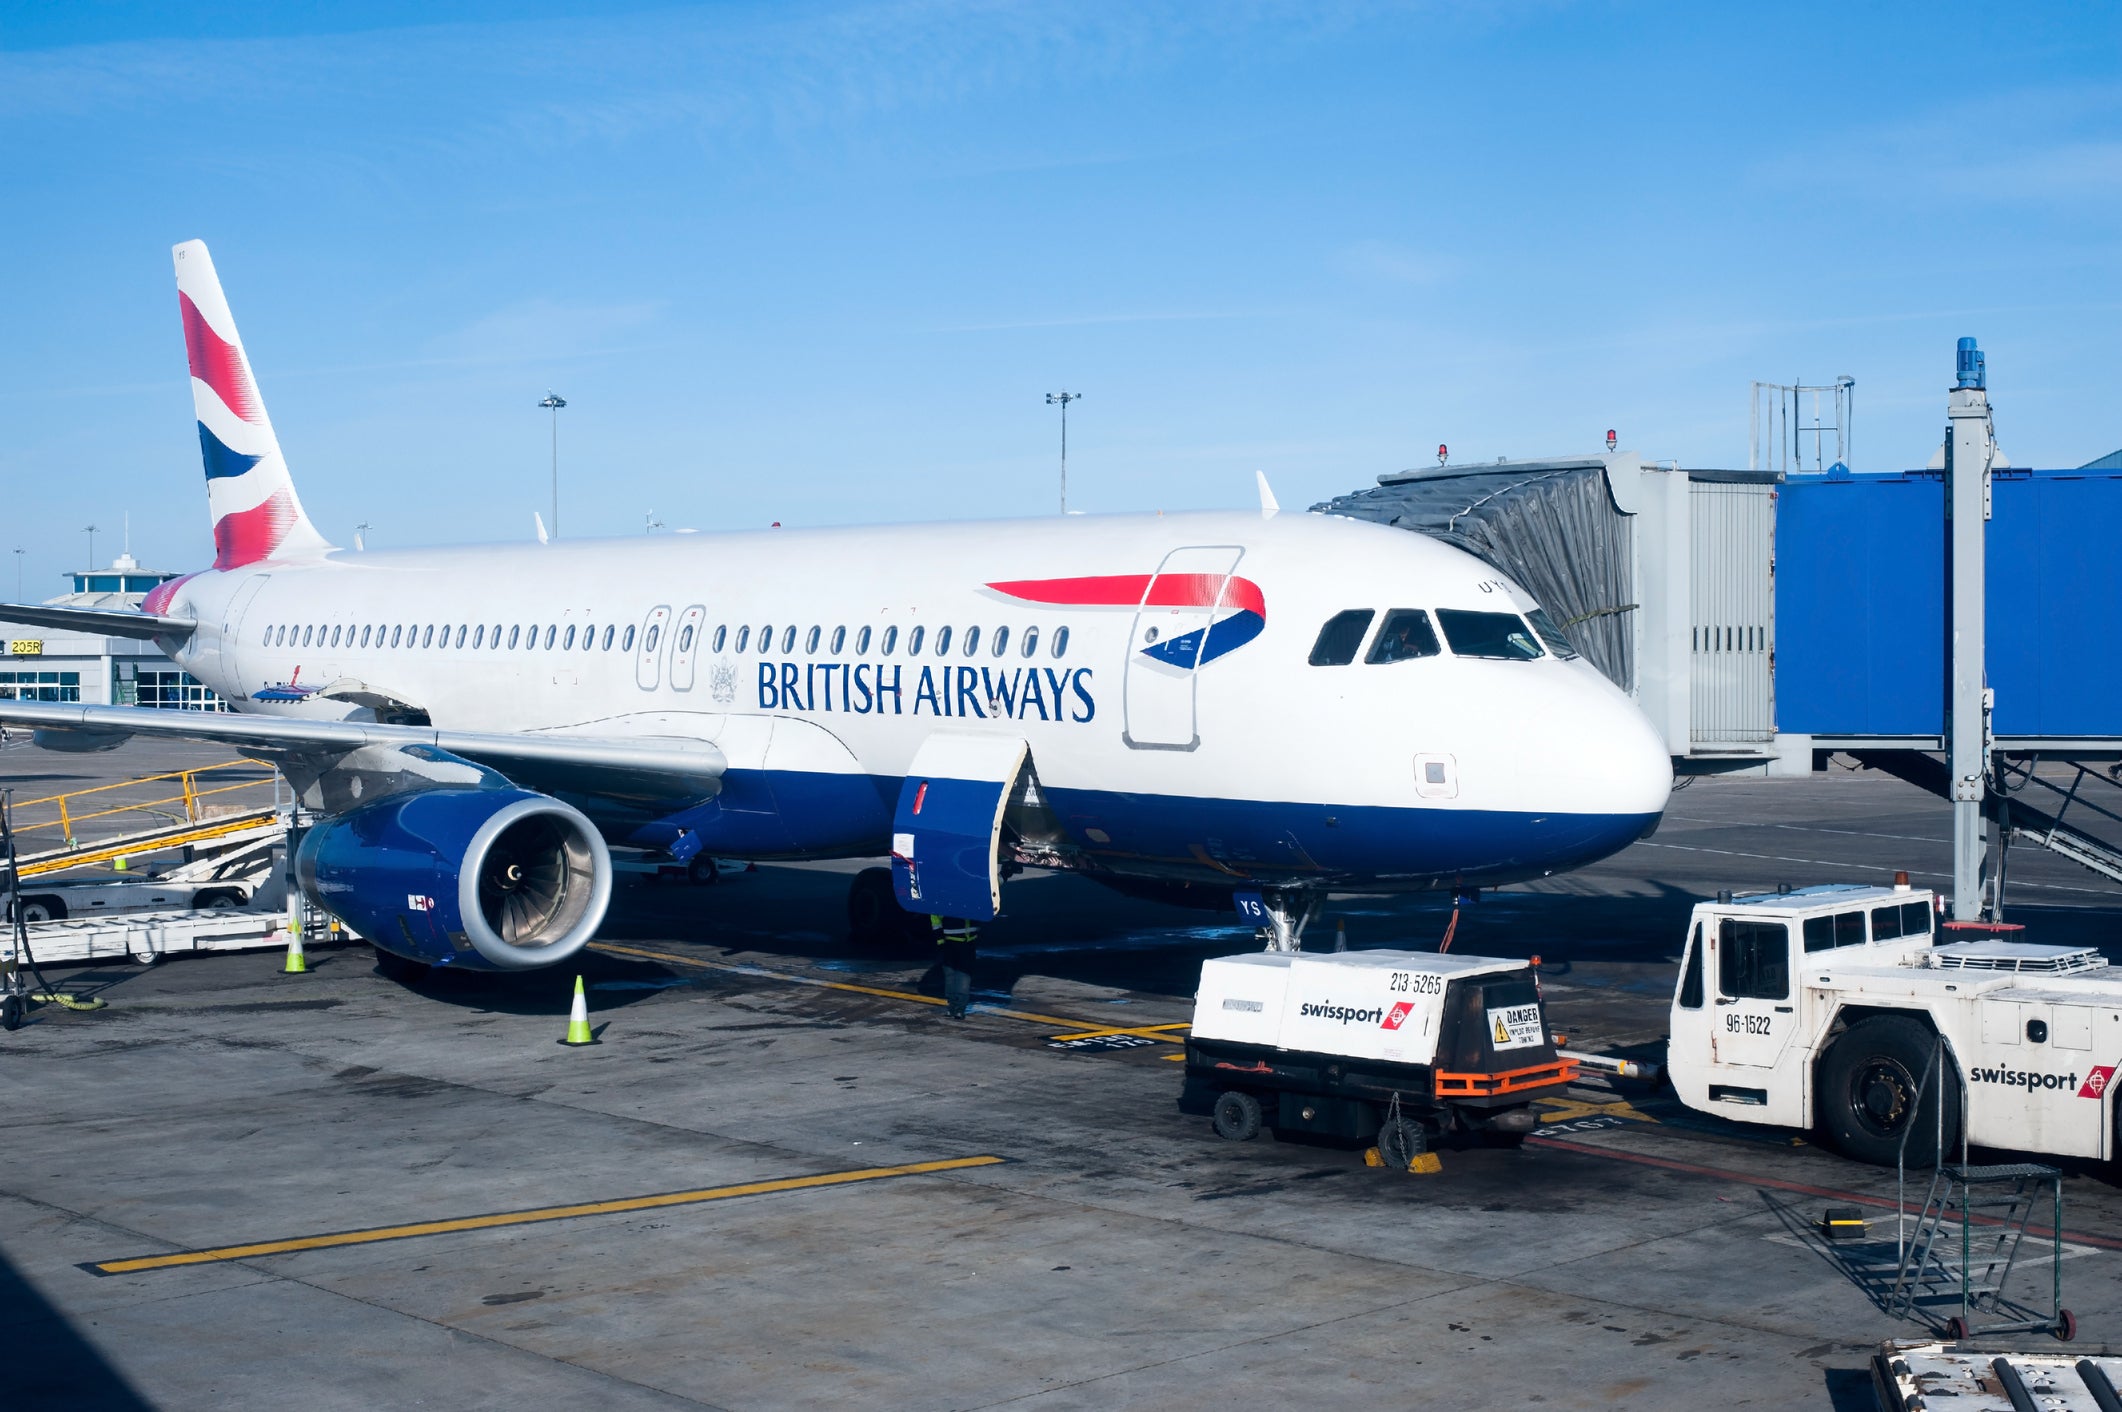 A total of seven BA staff members are being investigated for the group chat